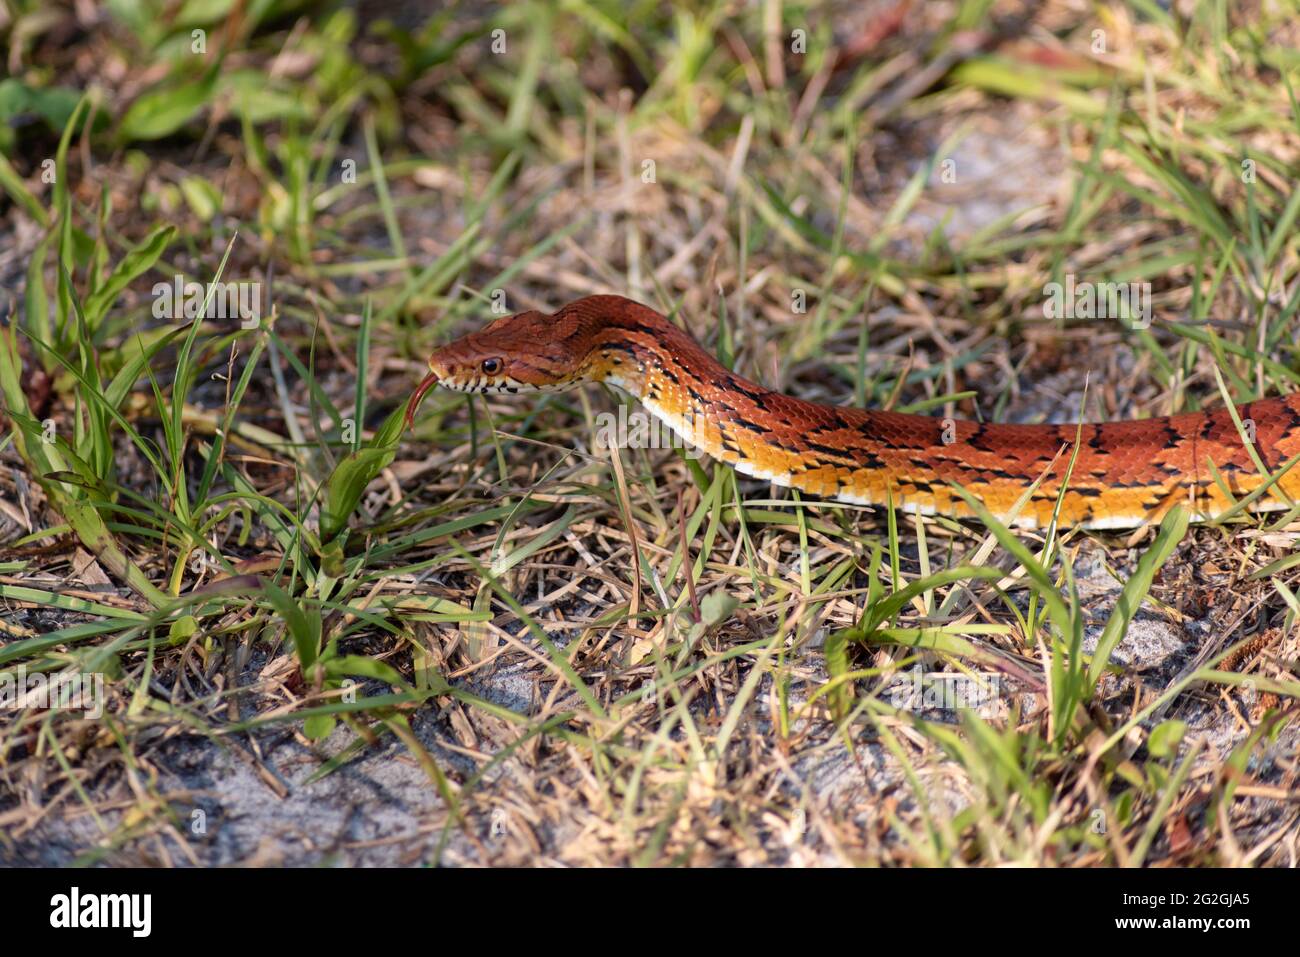 Corn snake with tongue out calmly gliding through the grass. Pantherophis guttatus a North American species of a rat snake. Good for pest control Stock Photo